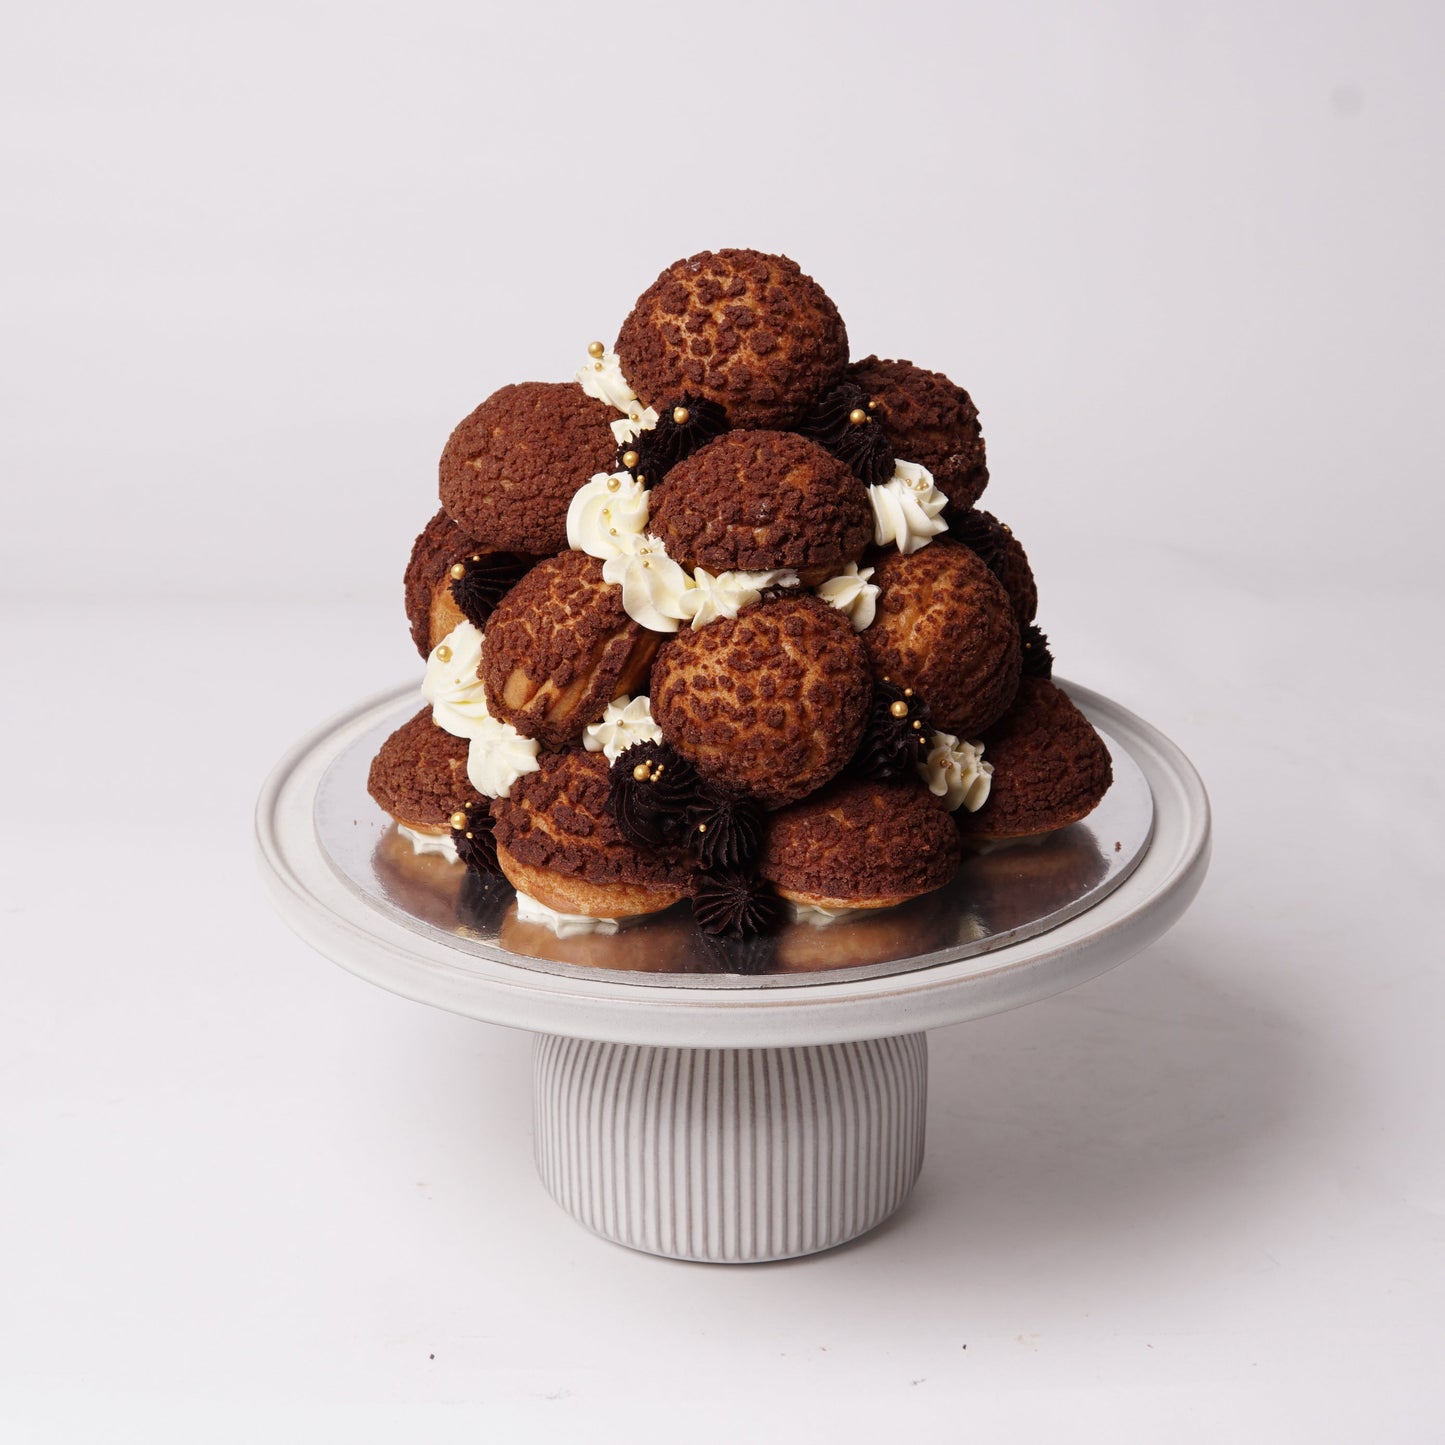 TOMORROW - Cookie Choux Tower